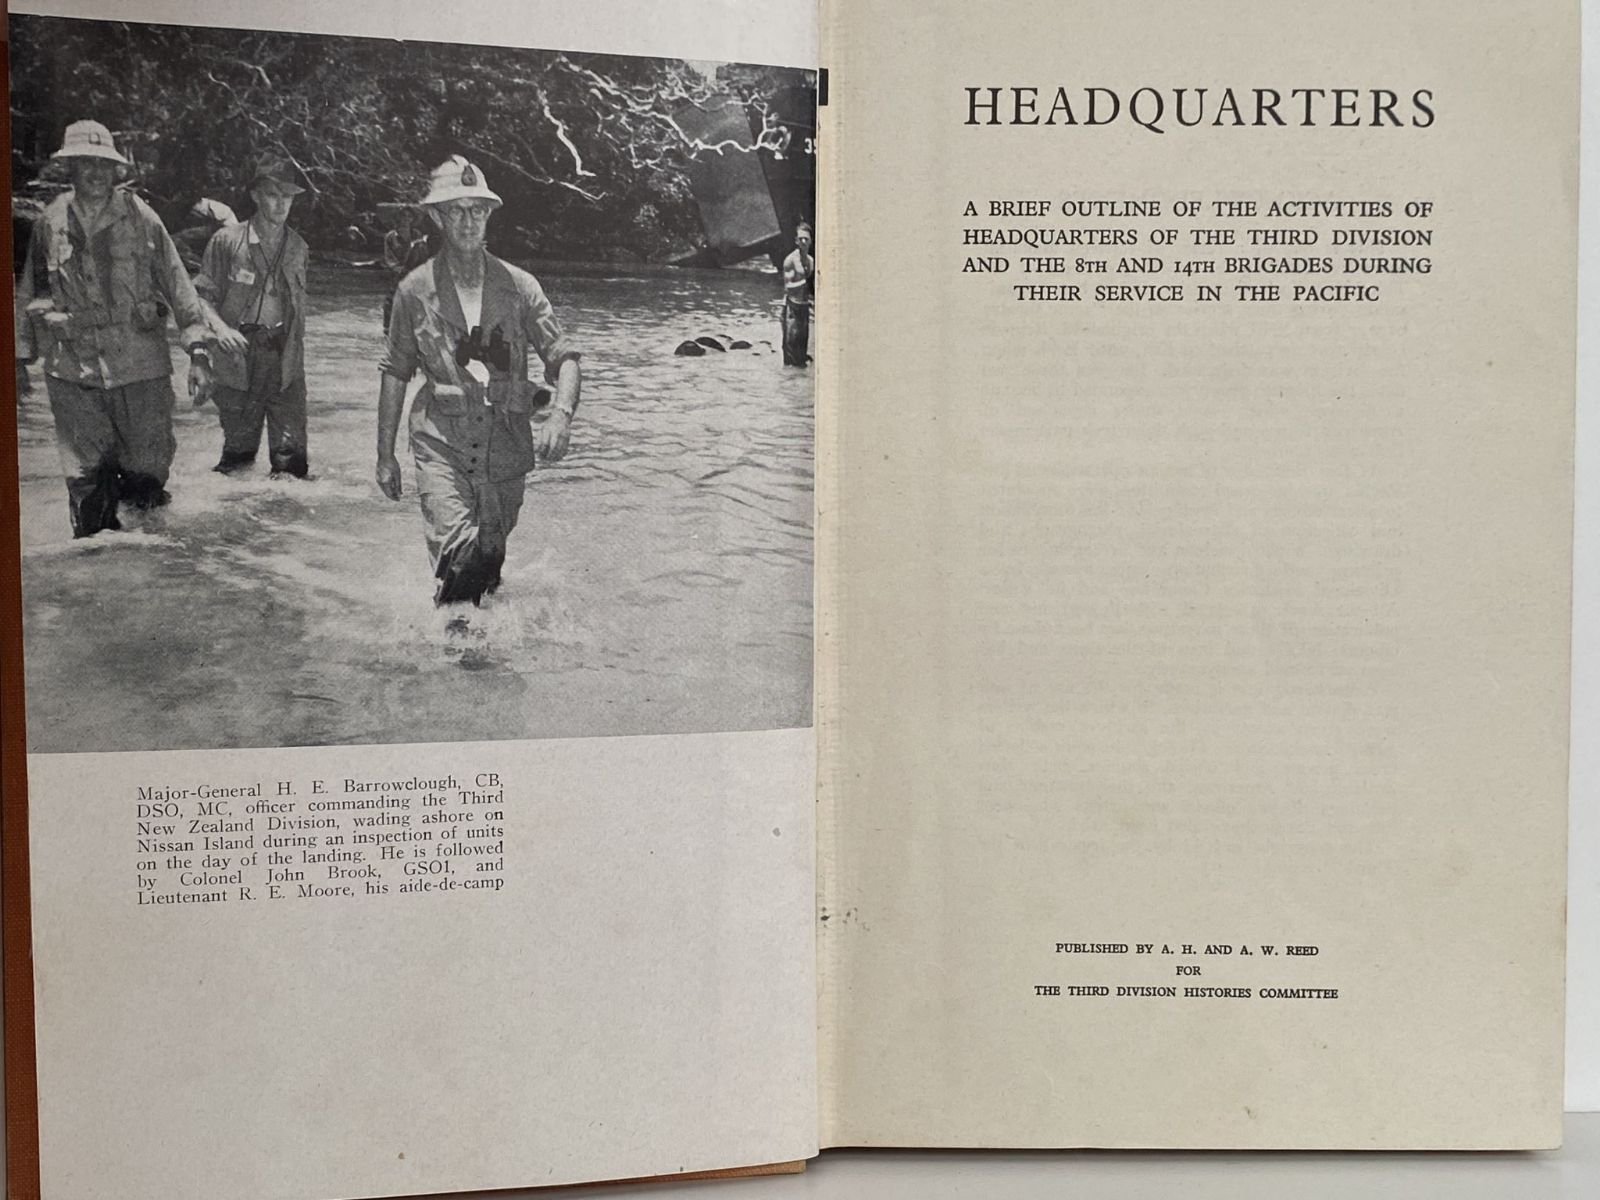 HEADQUARTERS & COMMUNICATIONS: Activities of the 3rd Division NZEP